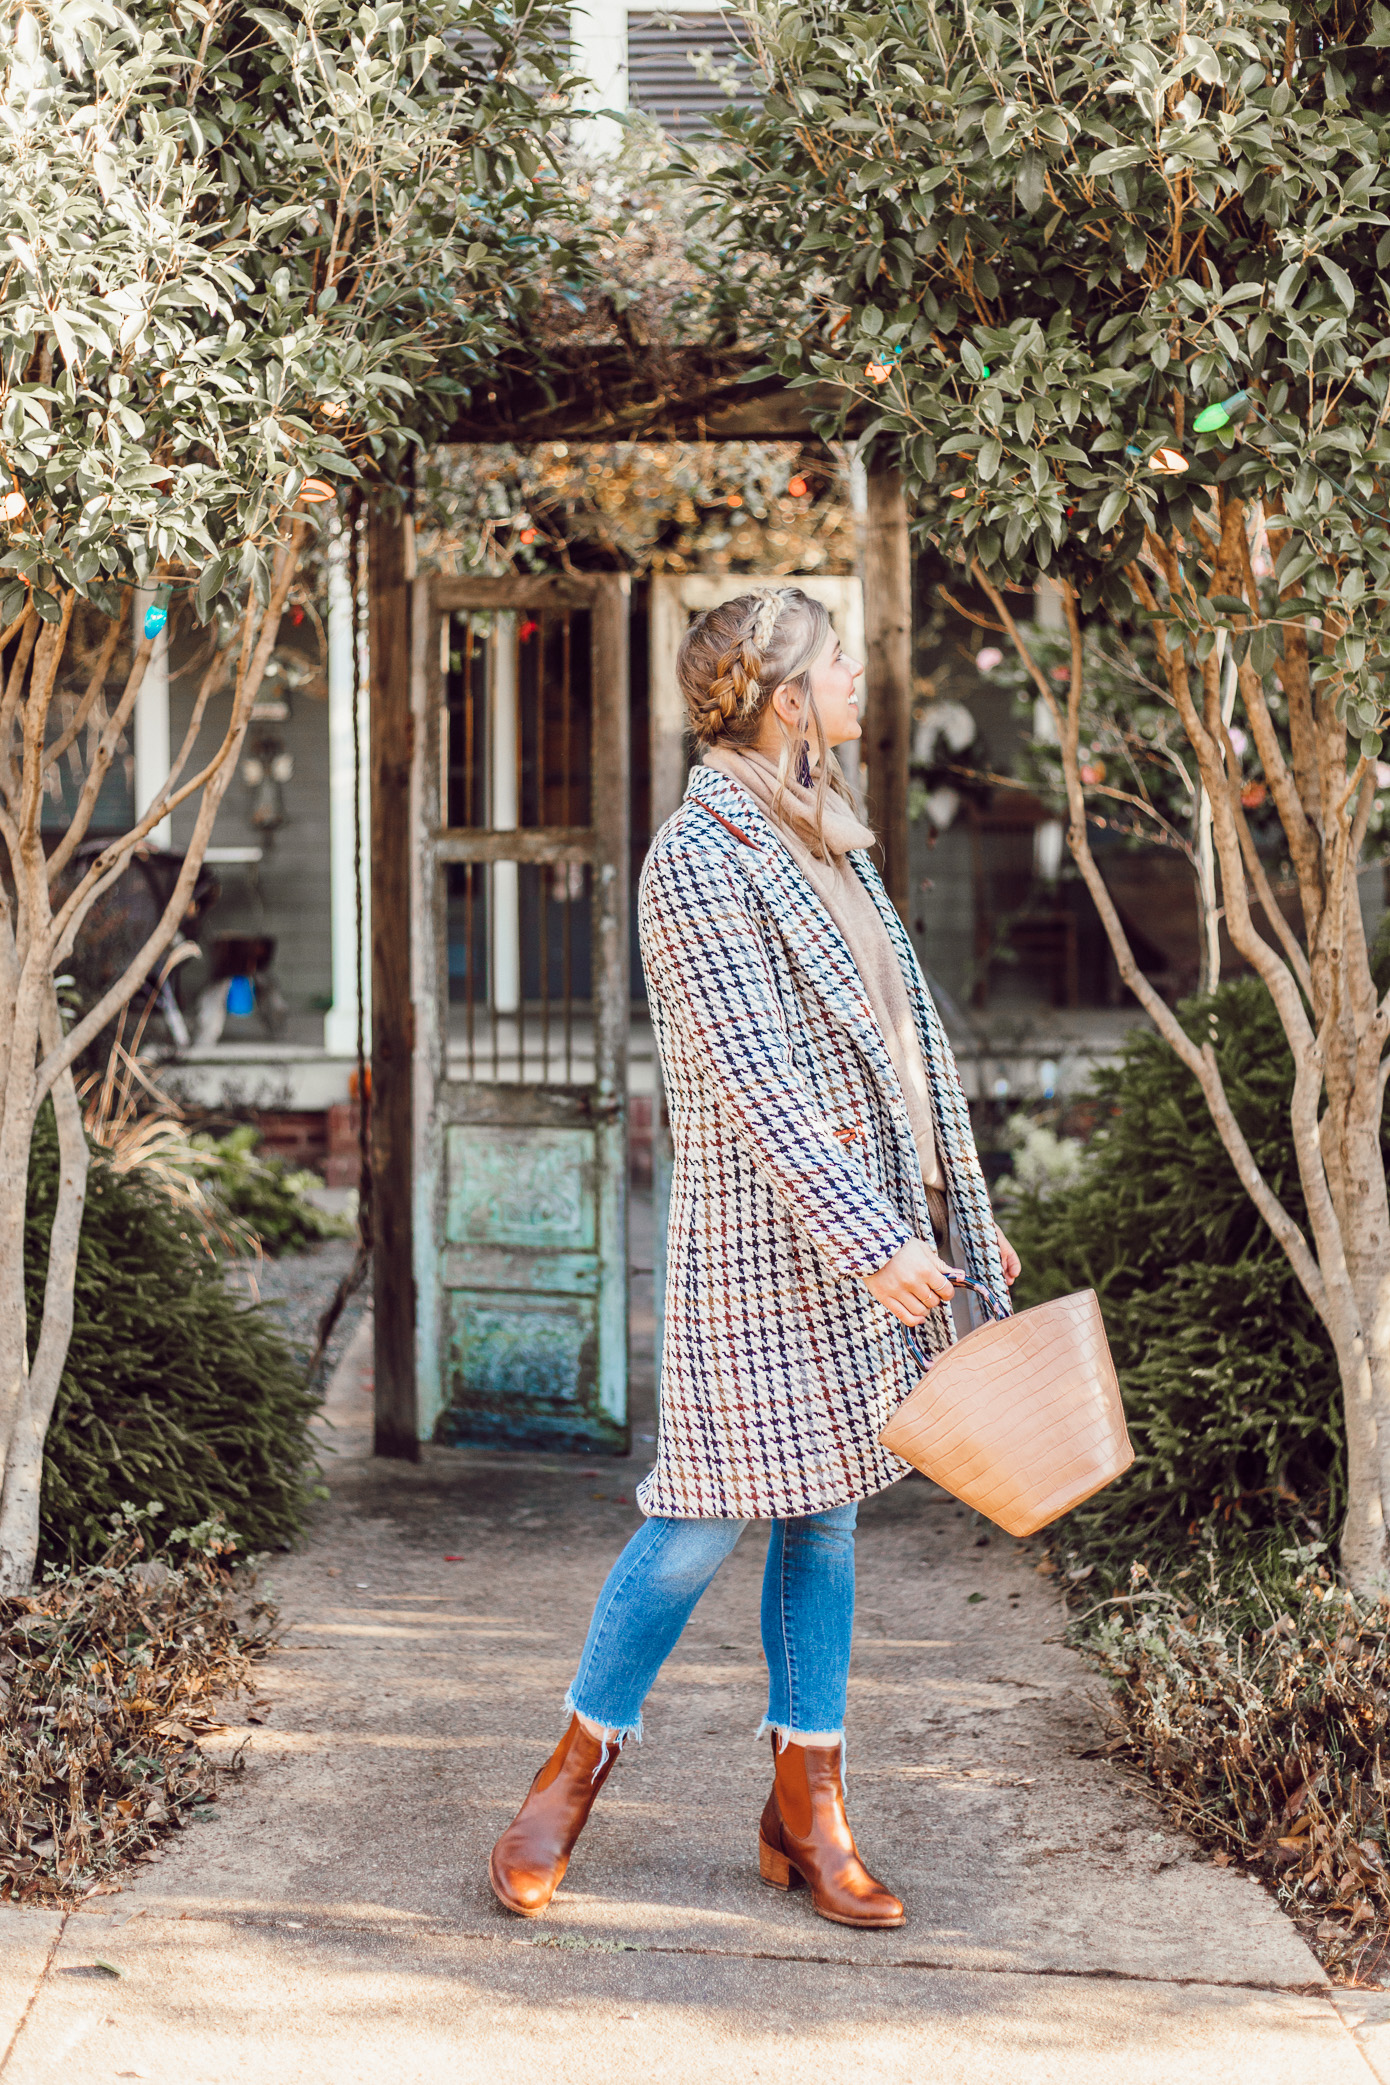 The Importance of a Great Winter Coat | Houndstooth Coat, Preppy Winter Style | Louella Reese